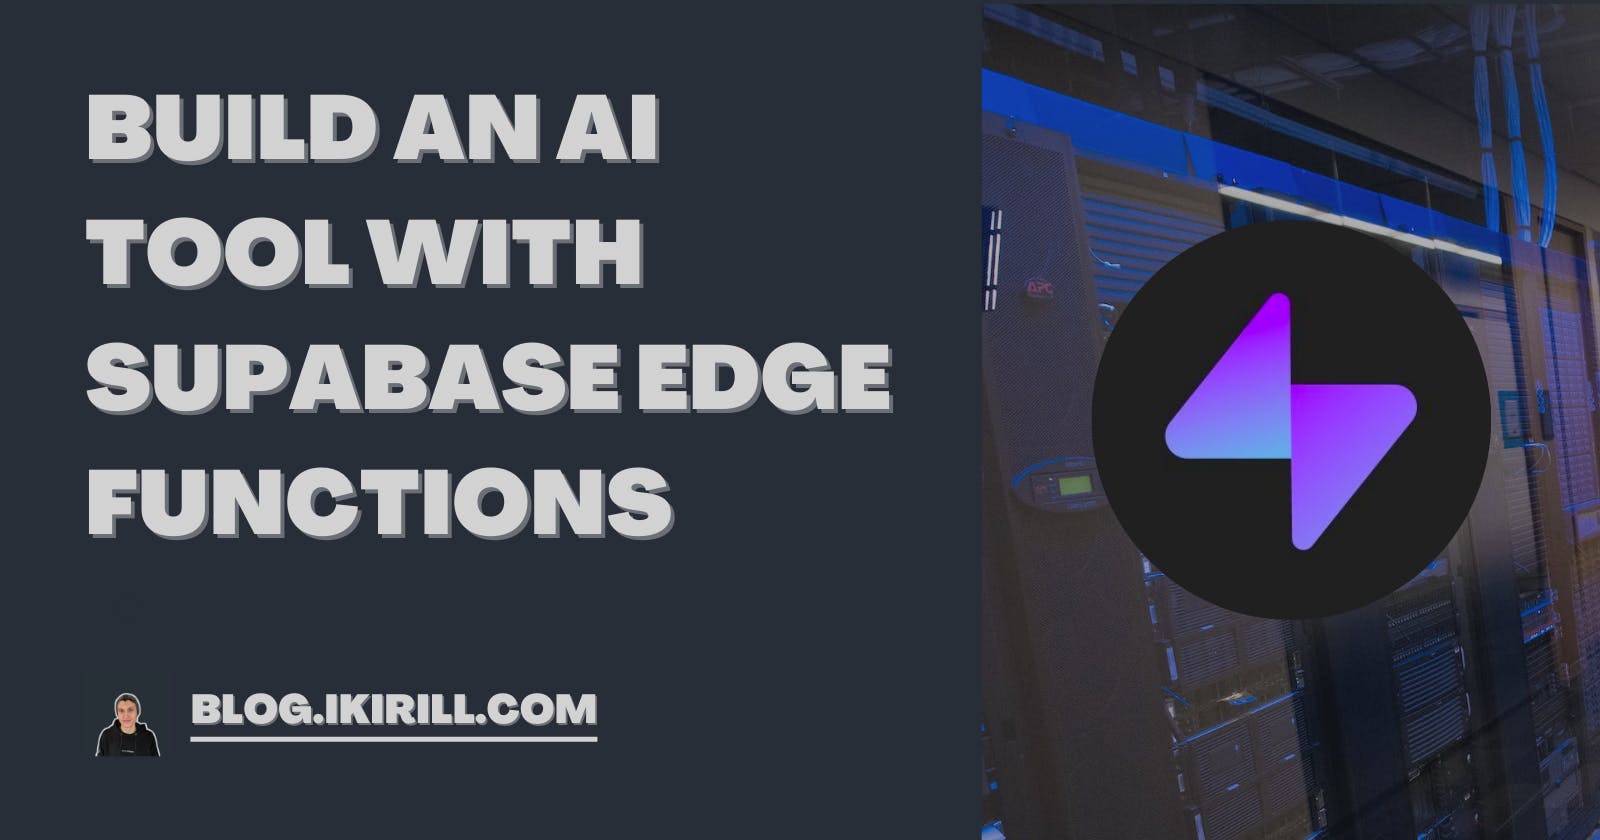 Build an AI Tool with Supabase Edge Functions